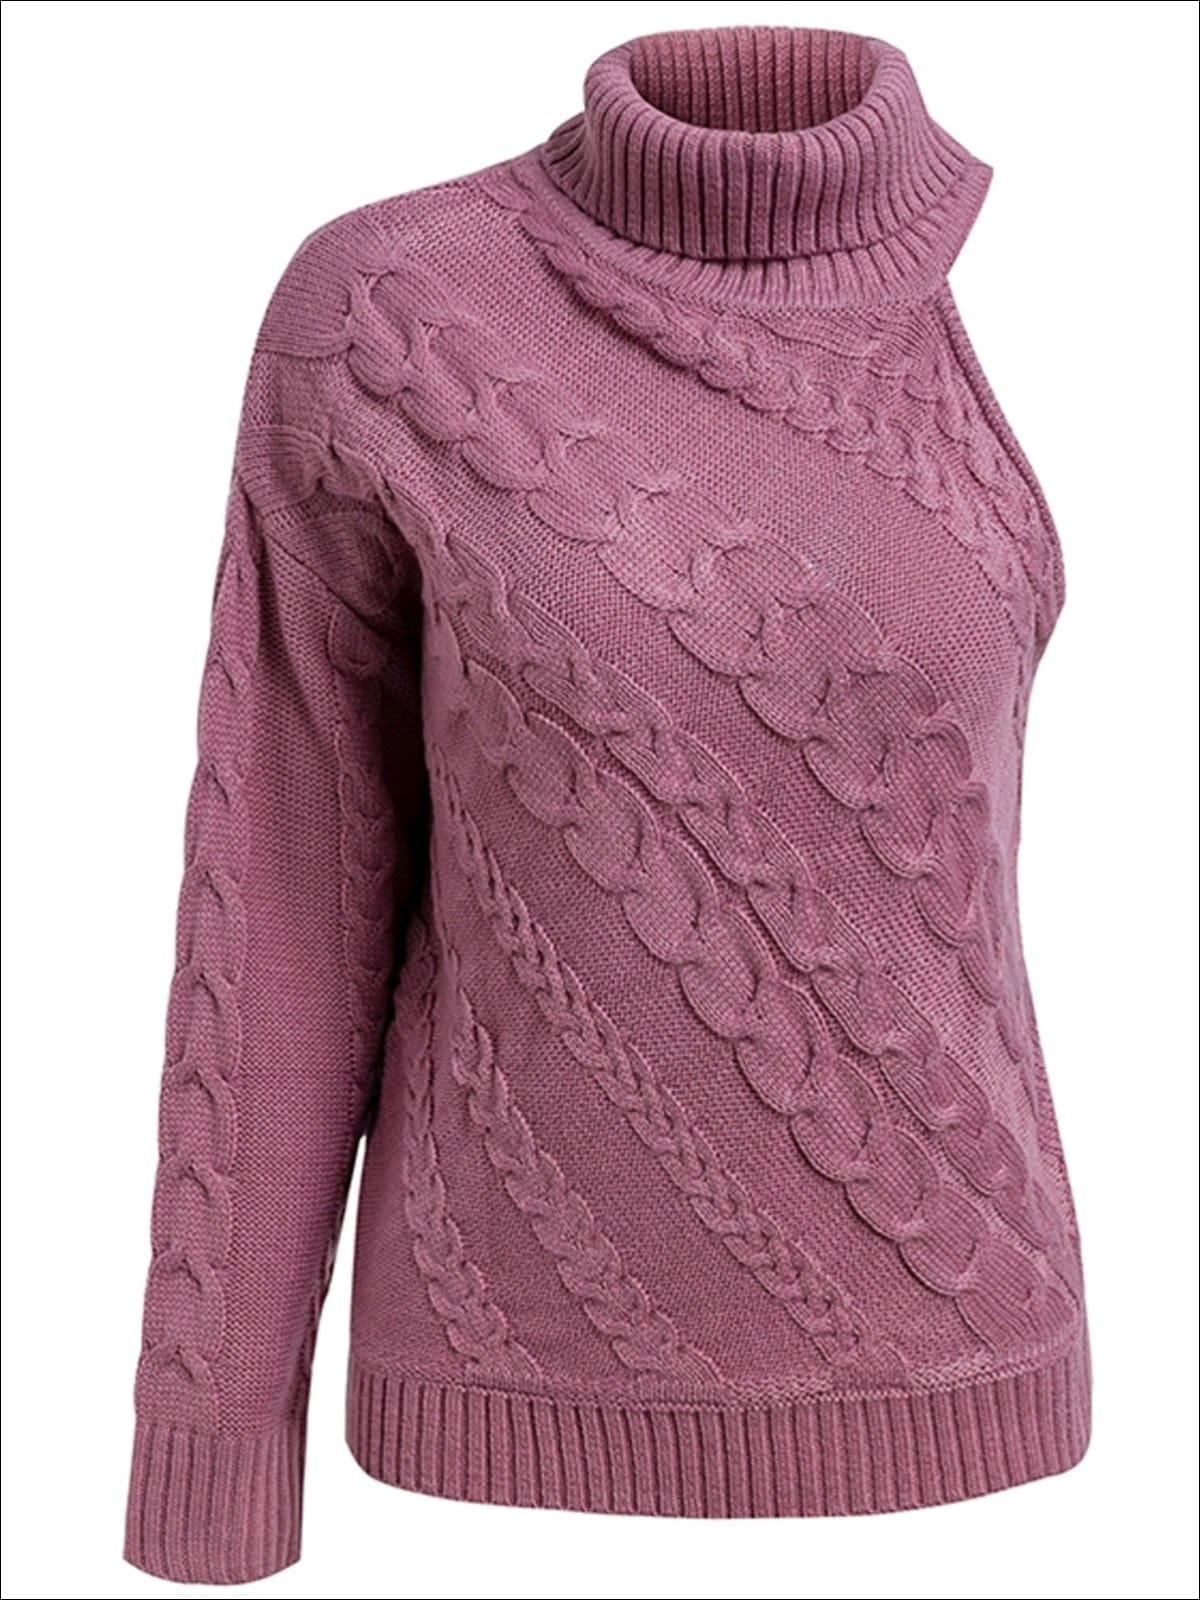 Womens One Shoulder Cable Knit Sweater - Pink / One Size - Womens Fall Sweaters